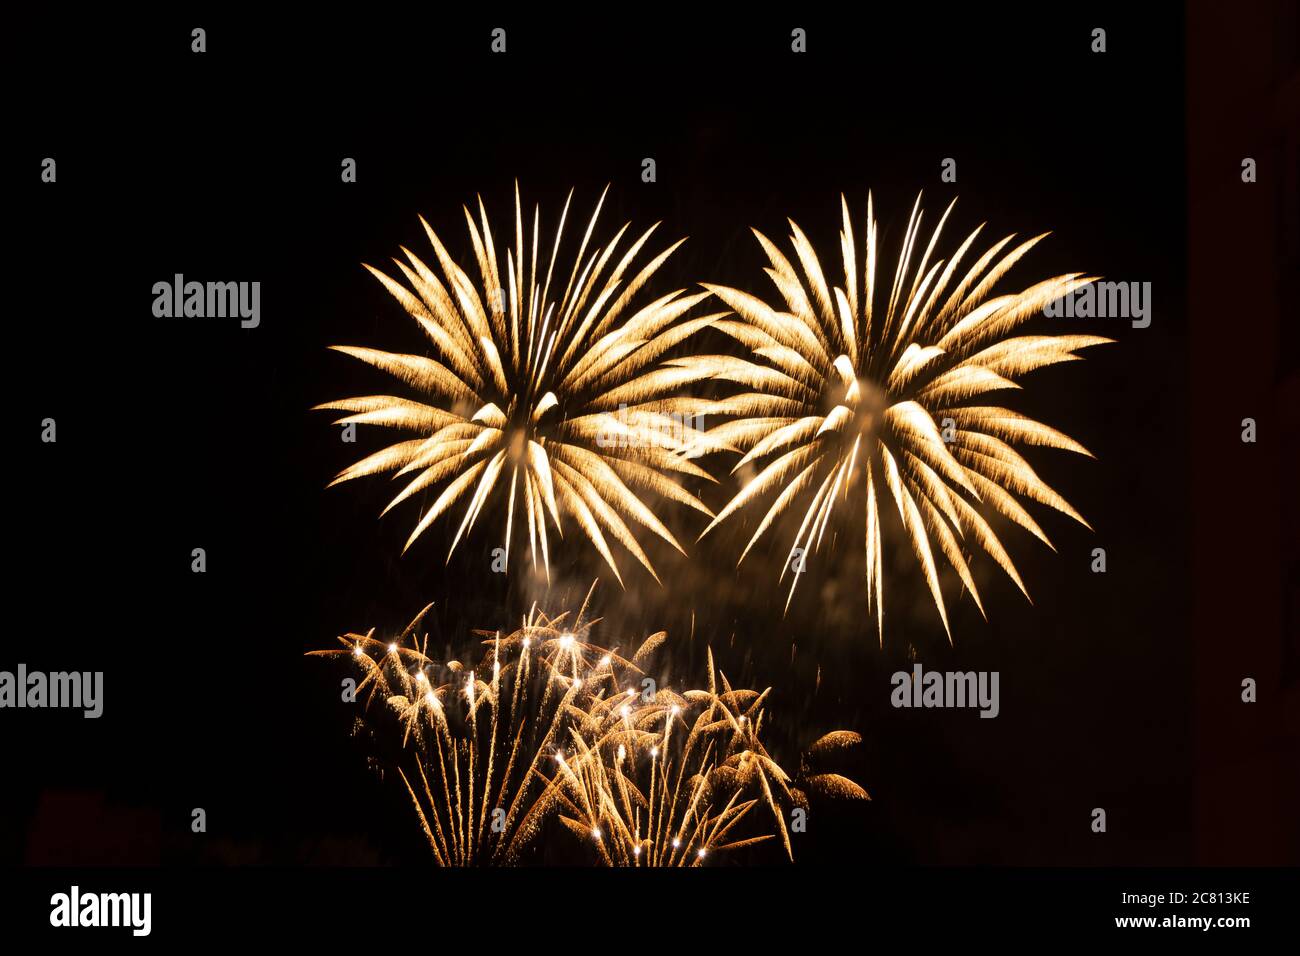 Fireworks illuminate the 14th of july, bastille day in France Stock Photo